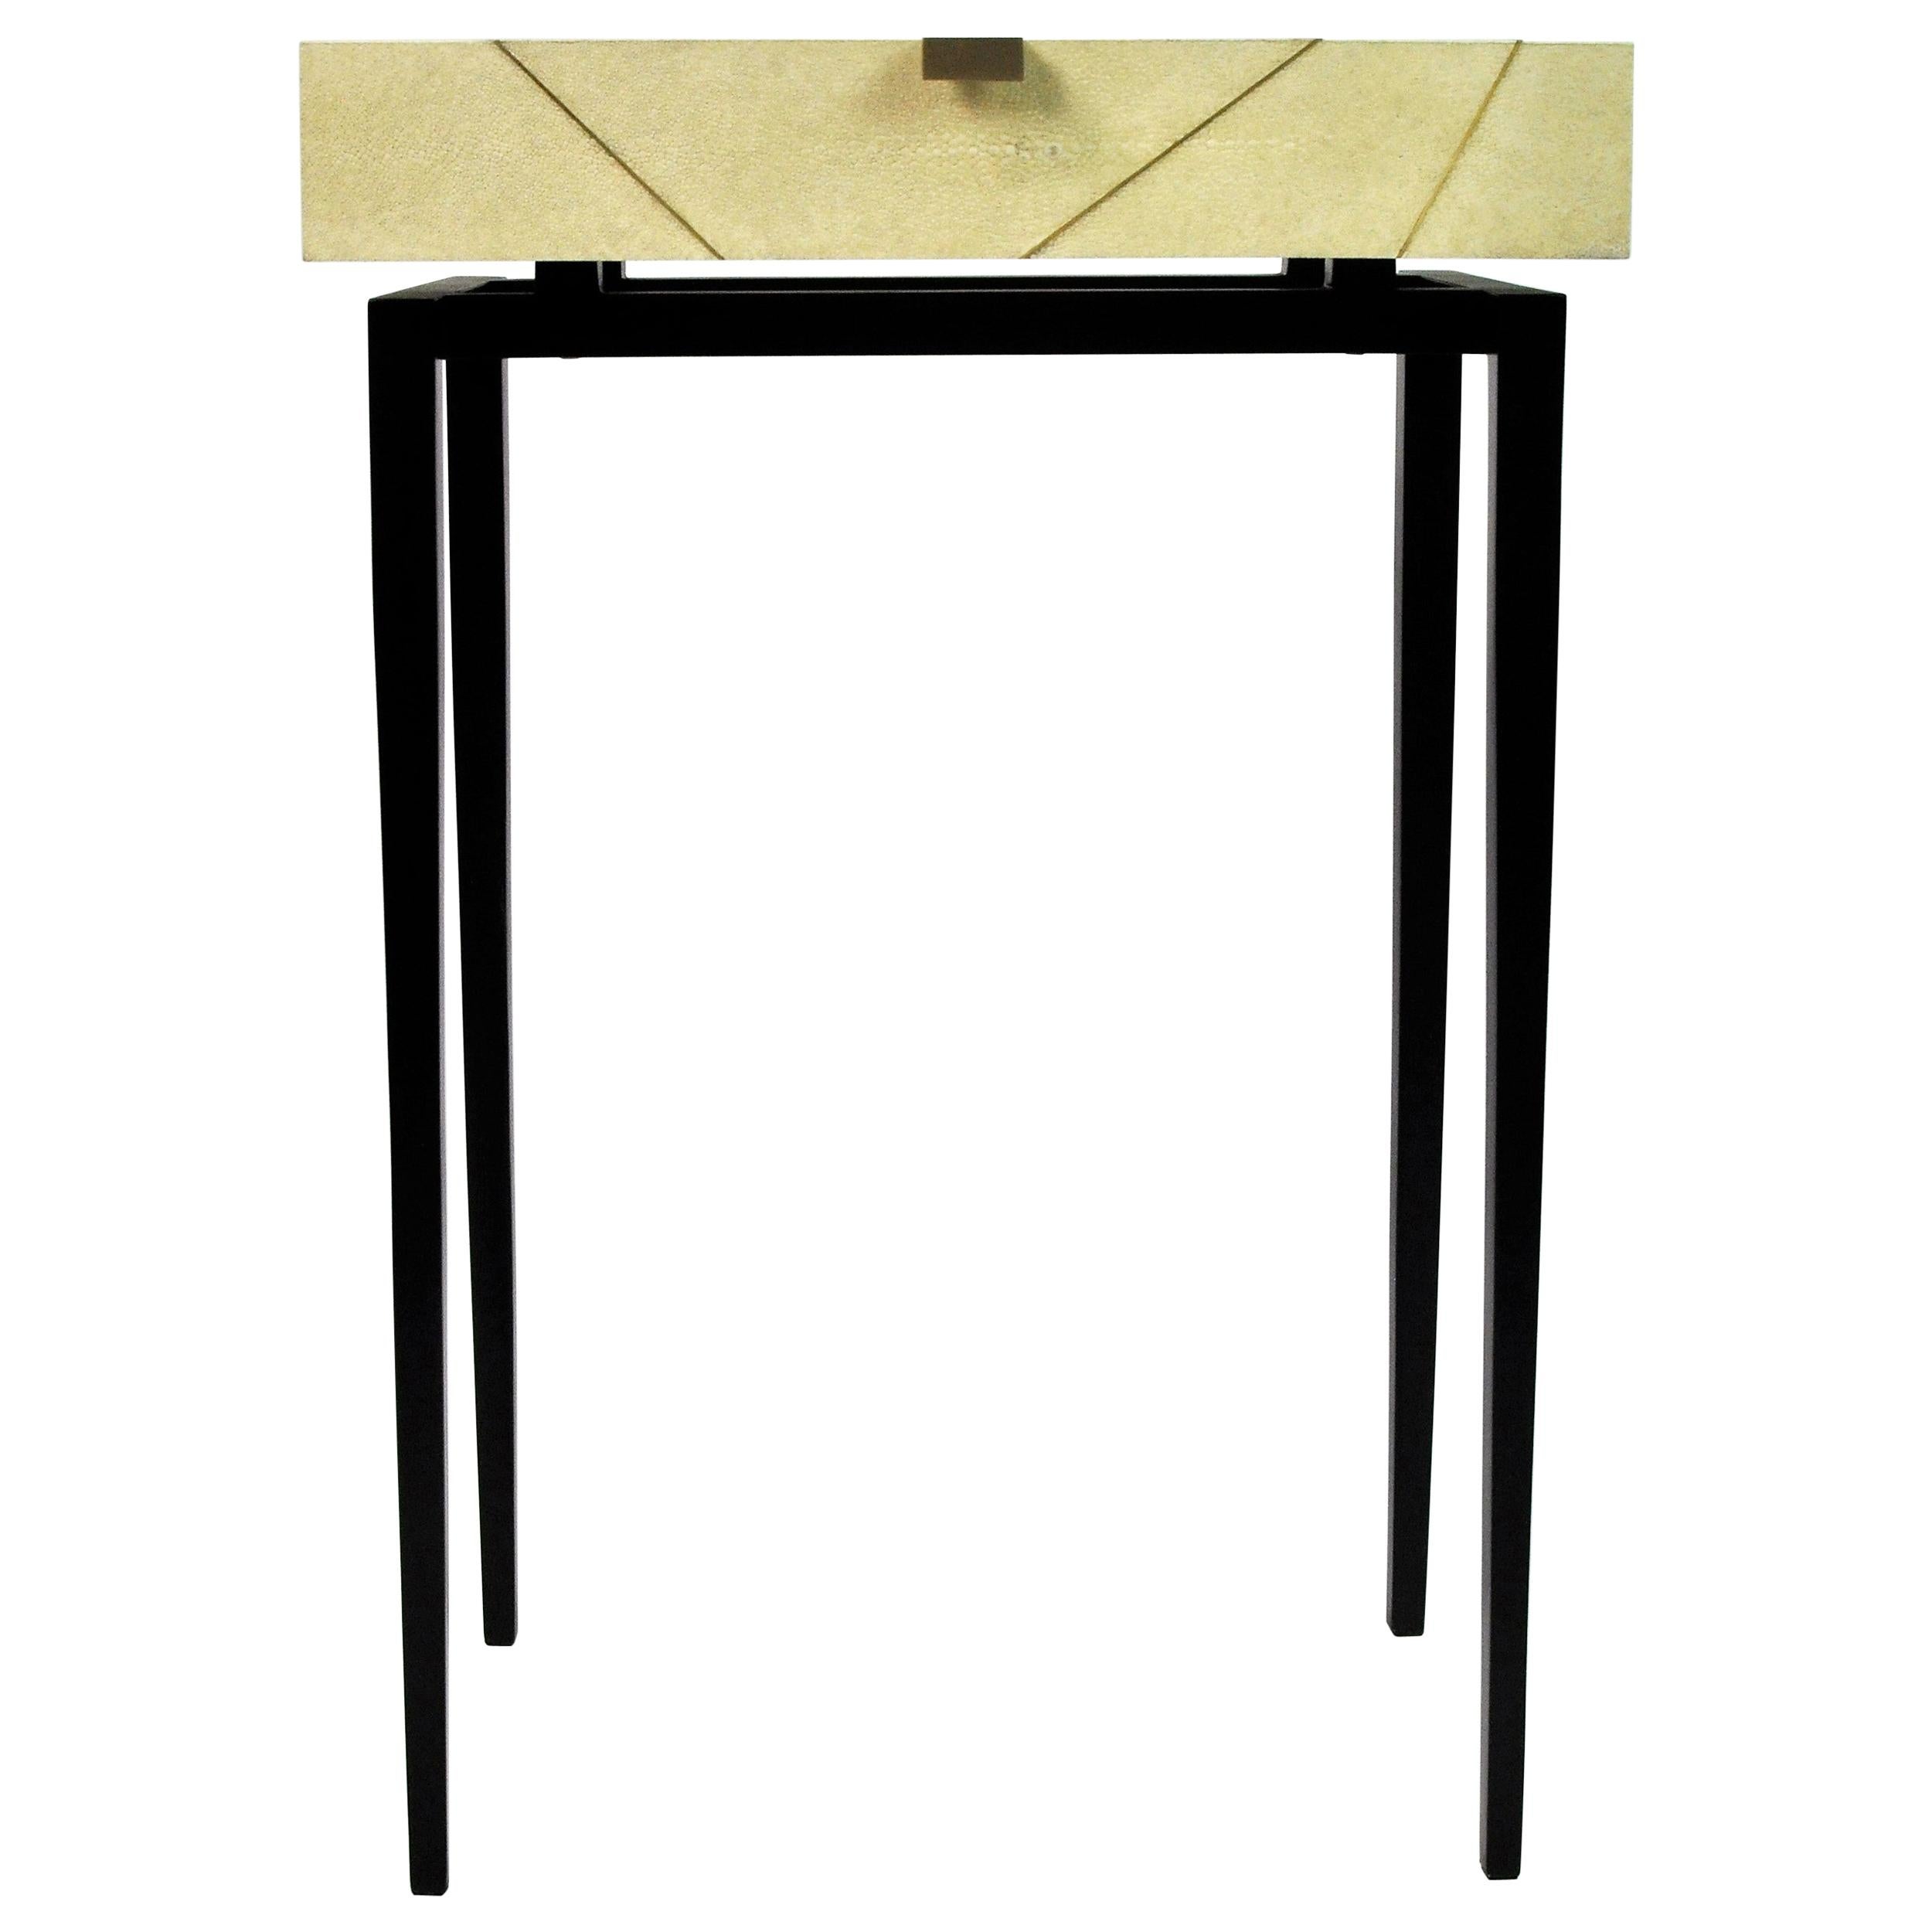 The console table RADIUS is made of shagreen with brass trims.
It has one thin drawer and the legs are in satin black painted metal feet.
This piece will settle very well in your entrance or your living room. The small dimensions make it very